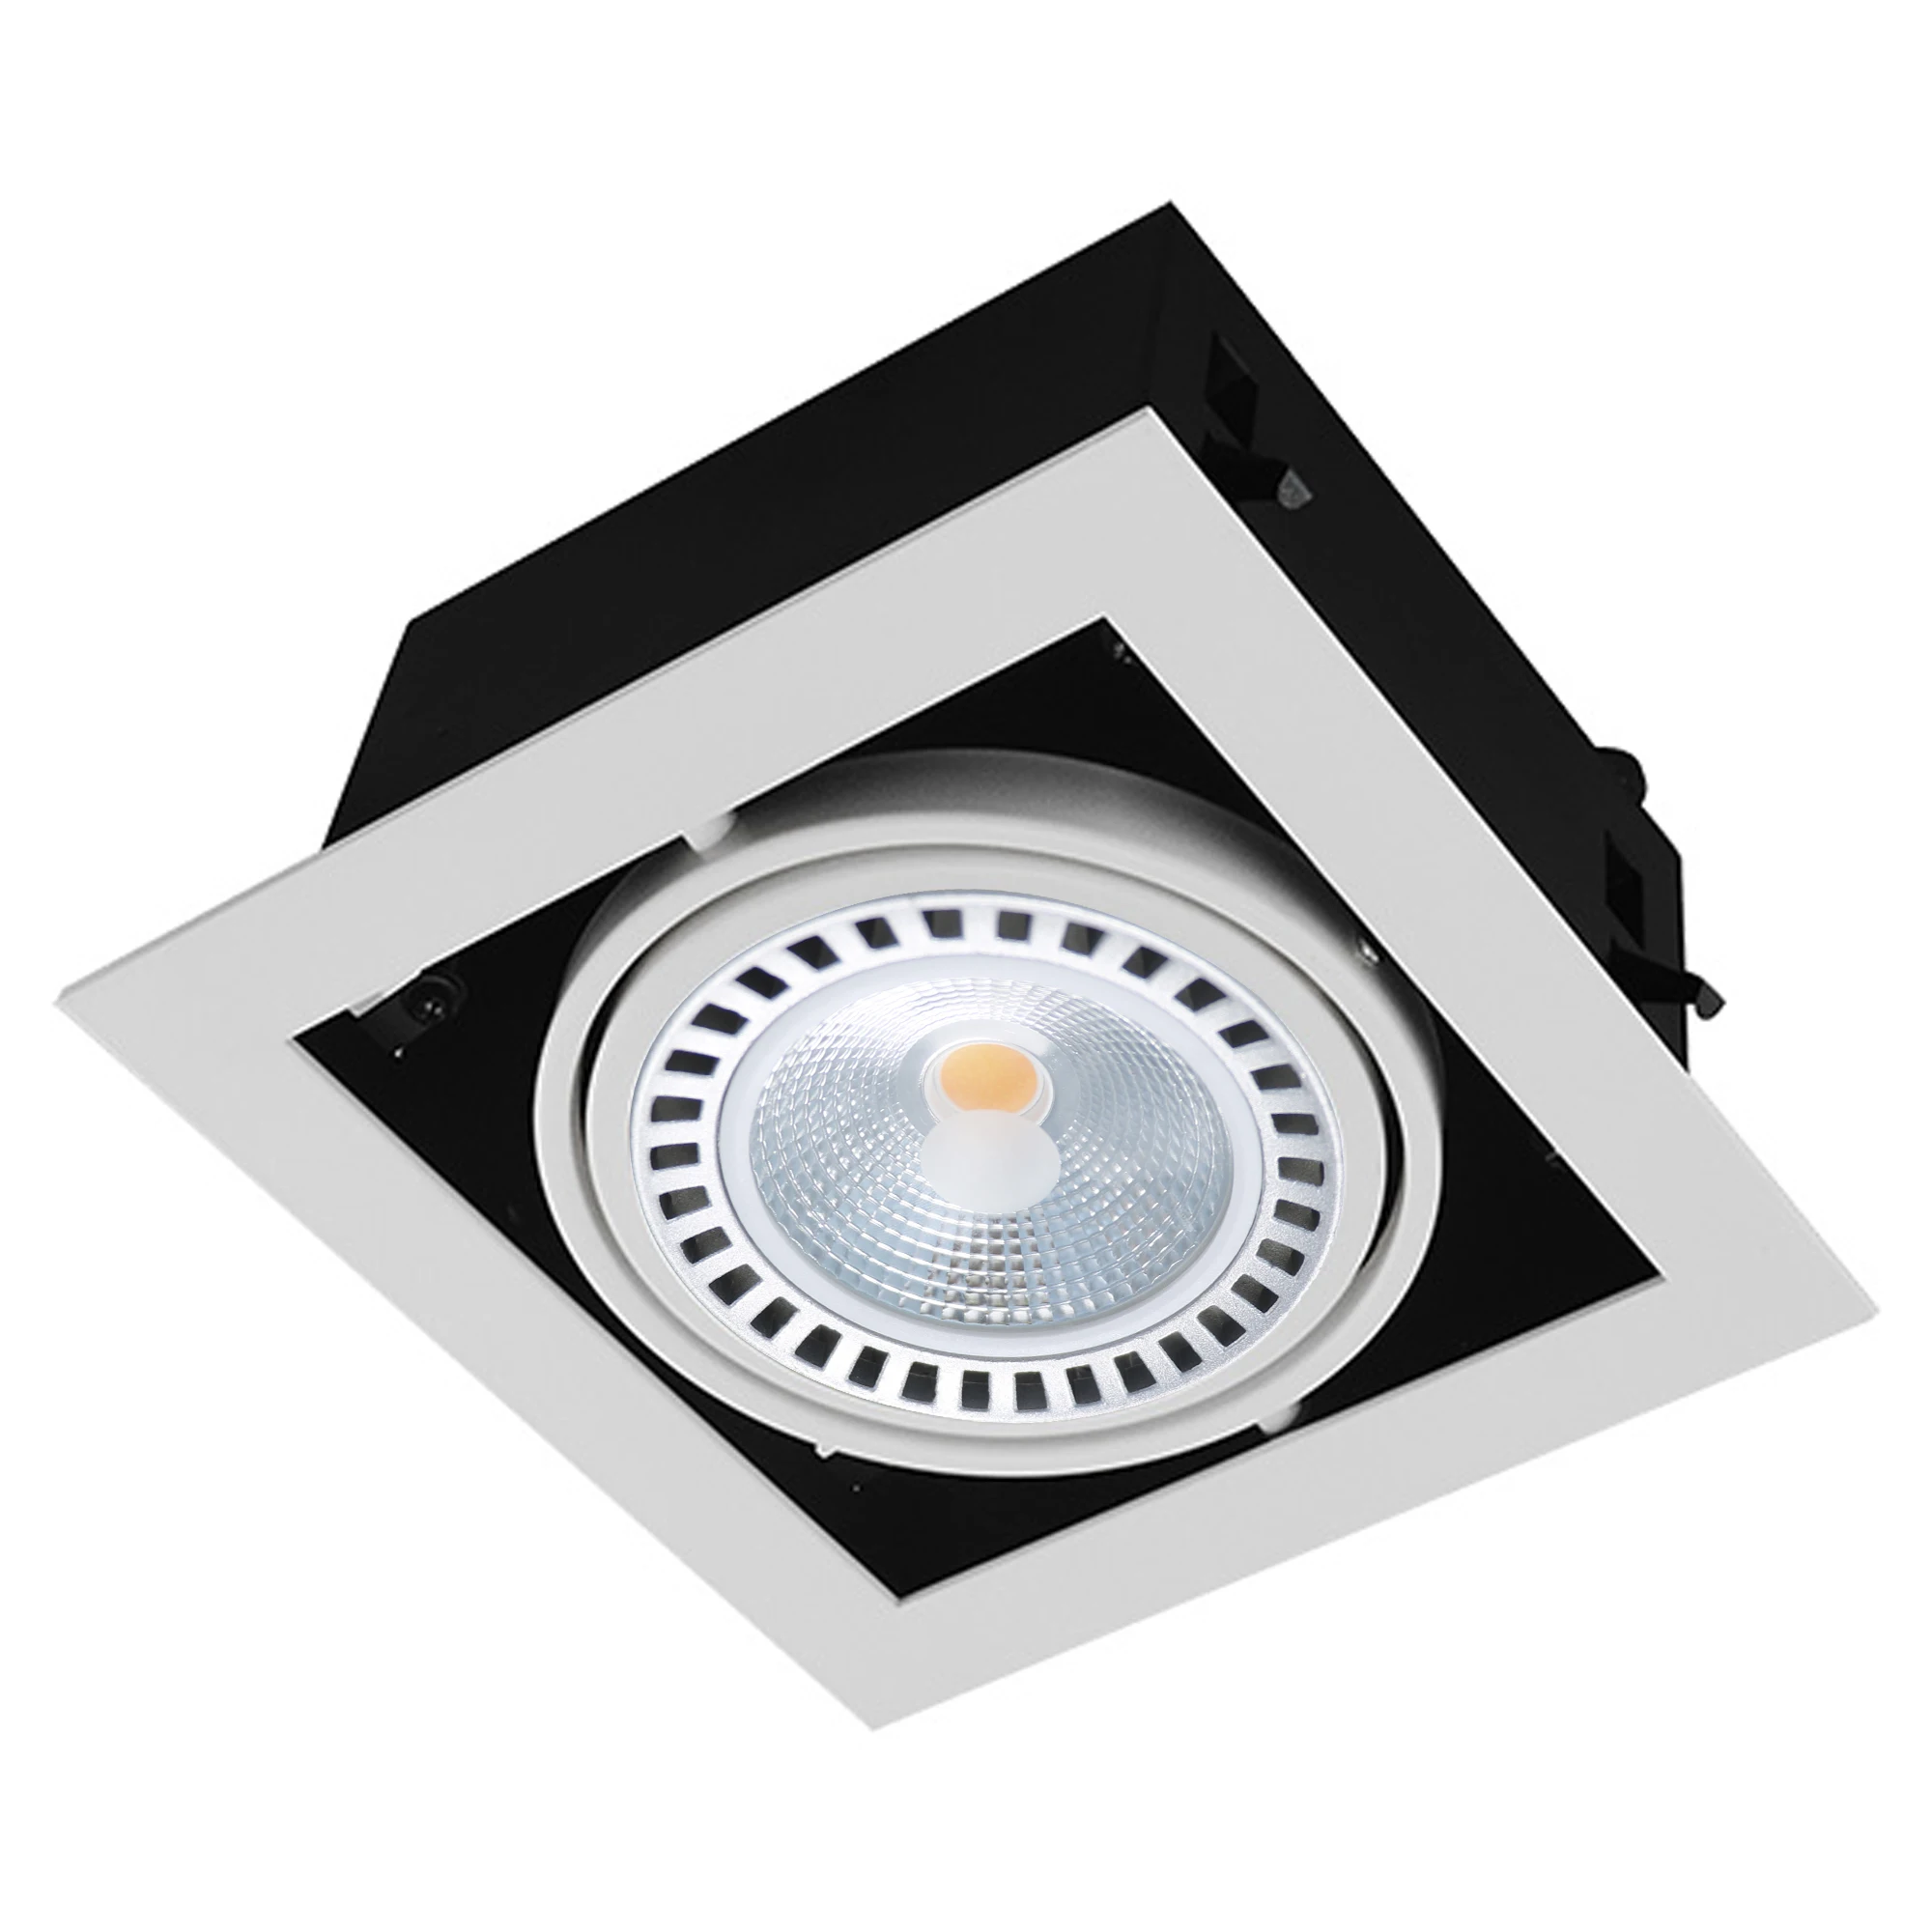 
20W LED Recessed Ceiling Light Recessed LED Downlight AR111 SINGLE DOWNLIGHT  (1600125396829)